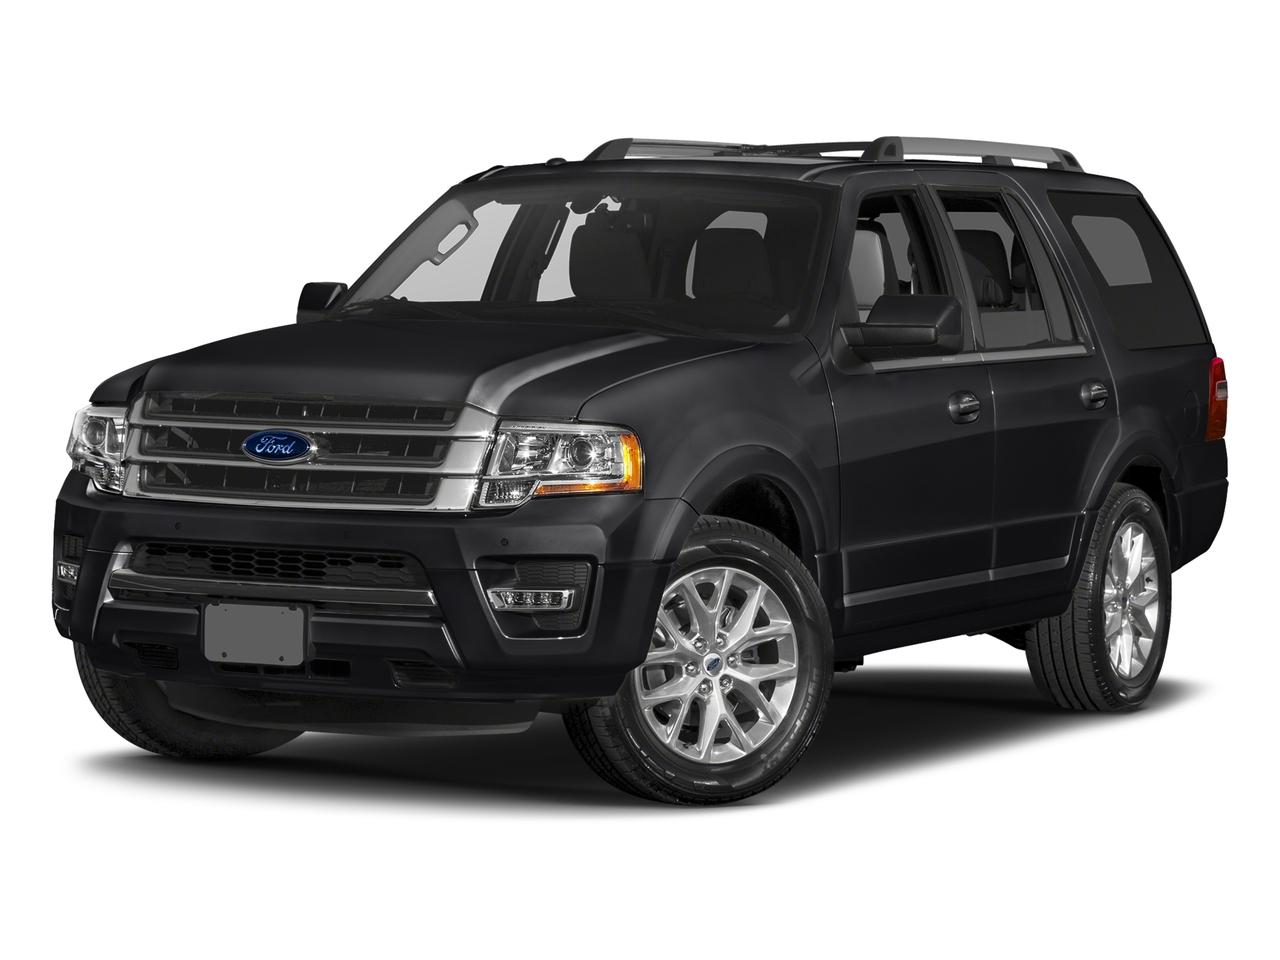 2017 Ford Expedition Vehicle Photo in Appleton, WI 54913